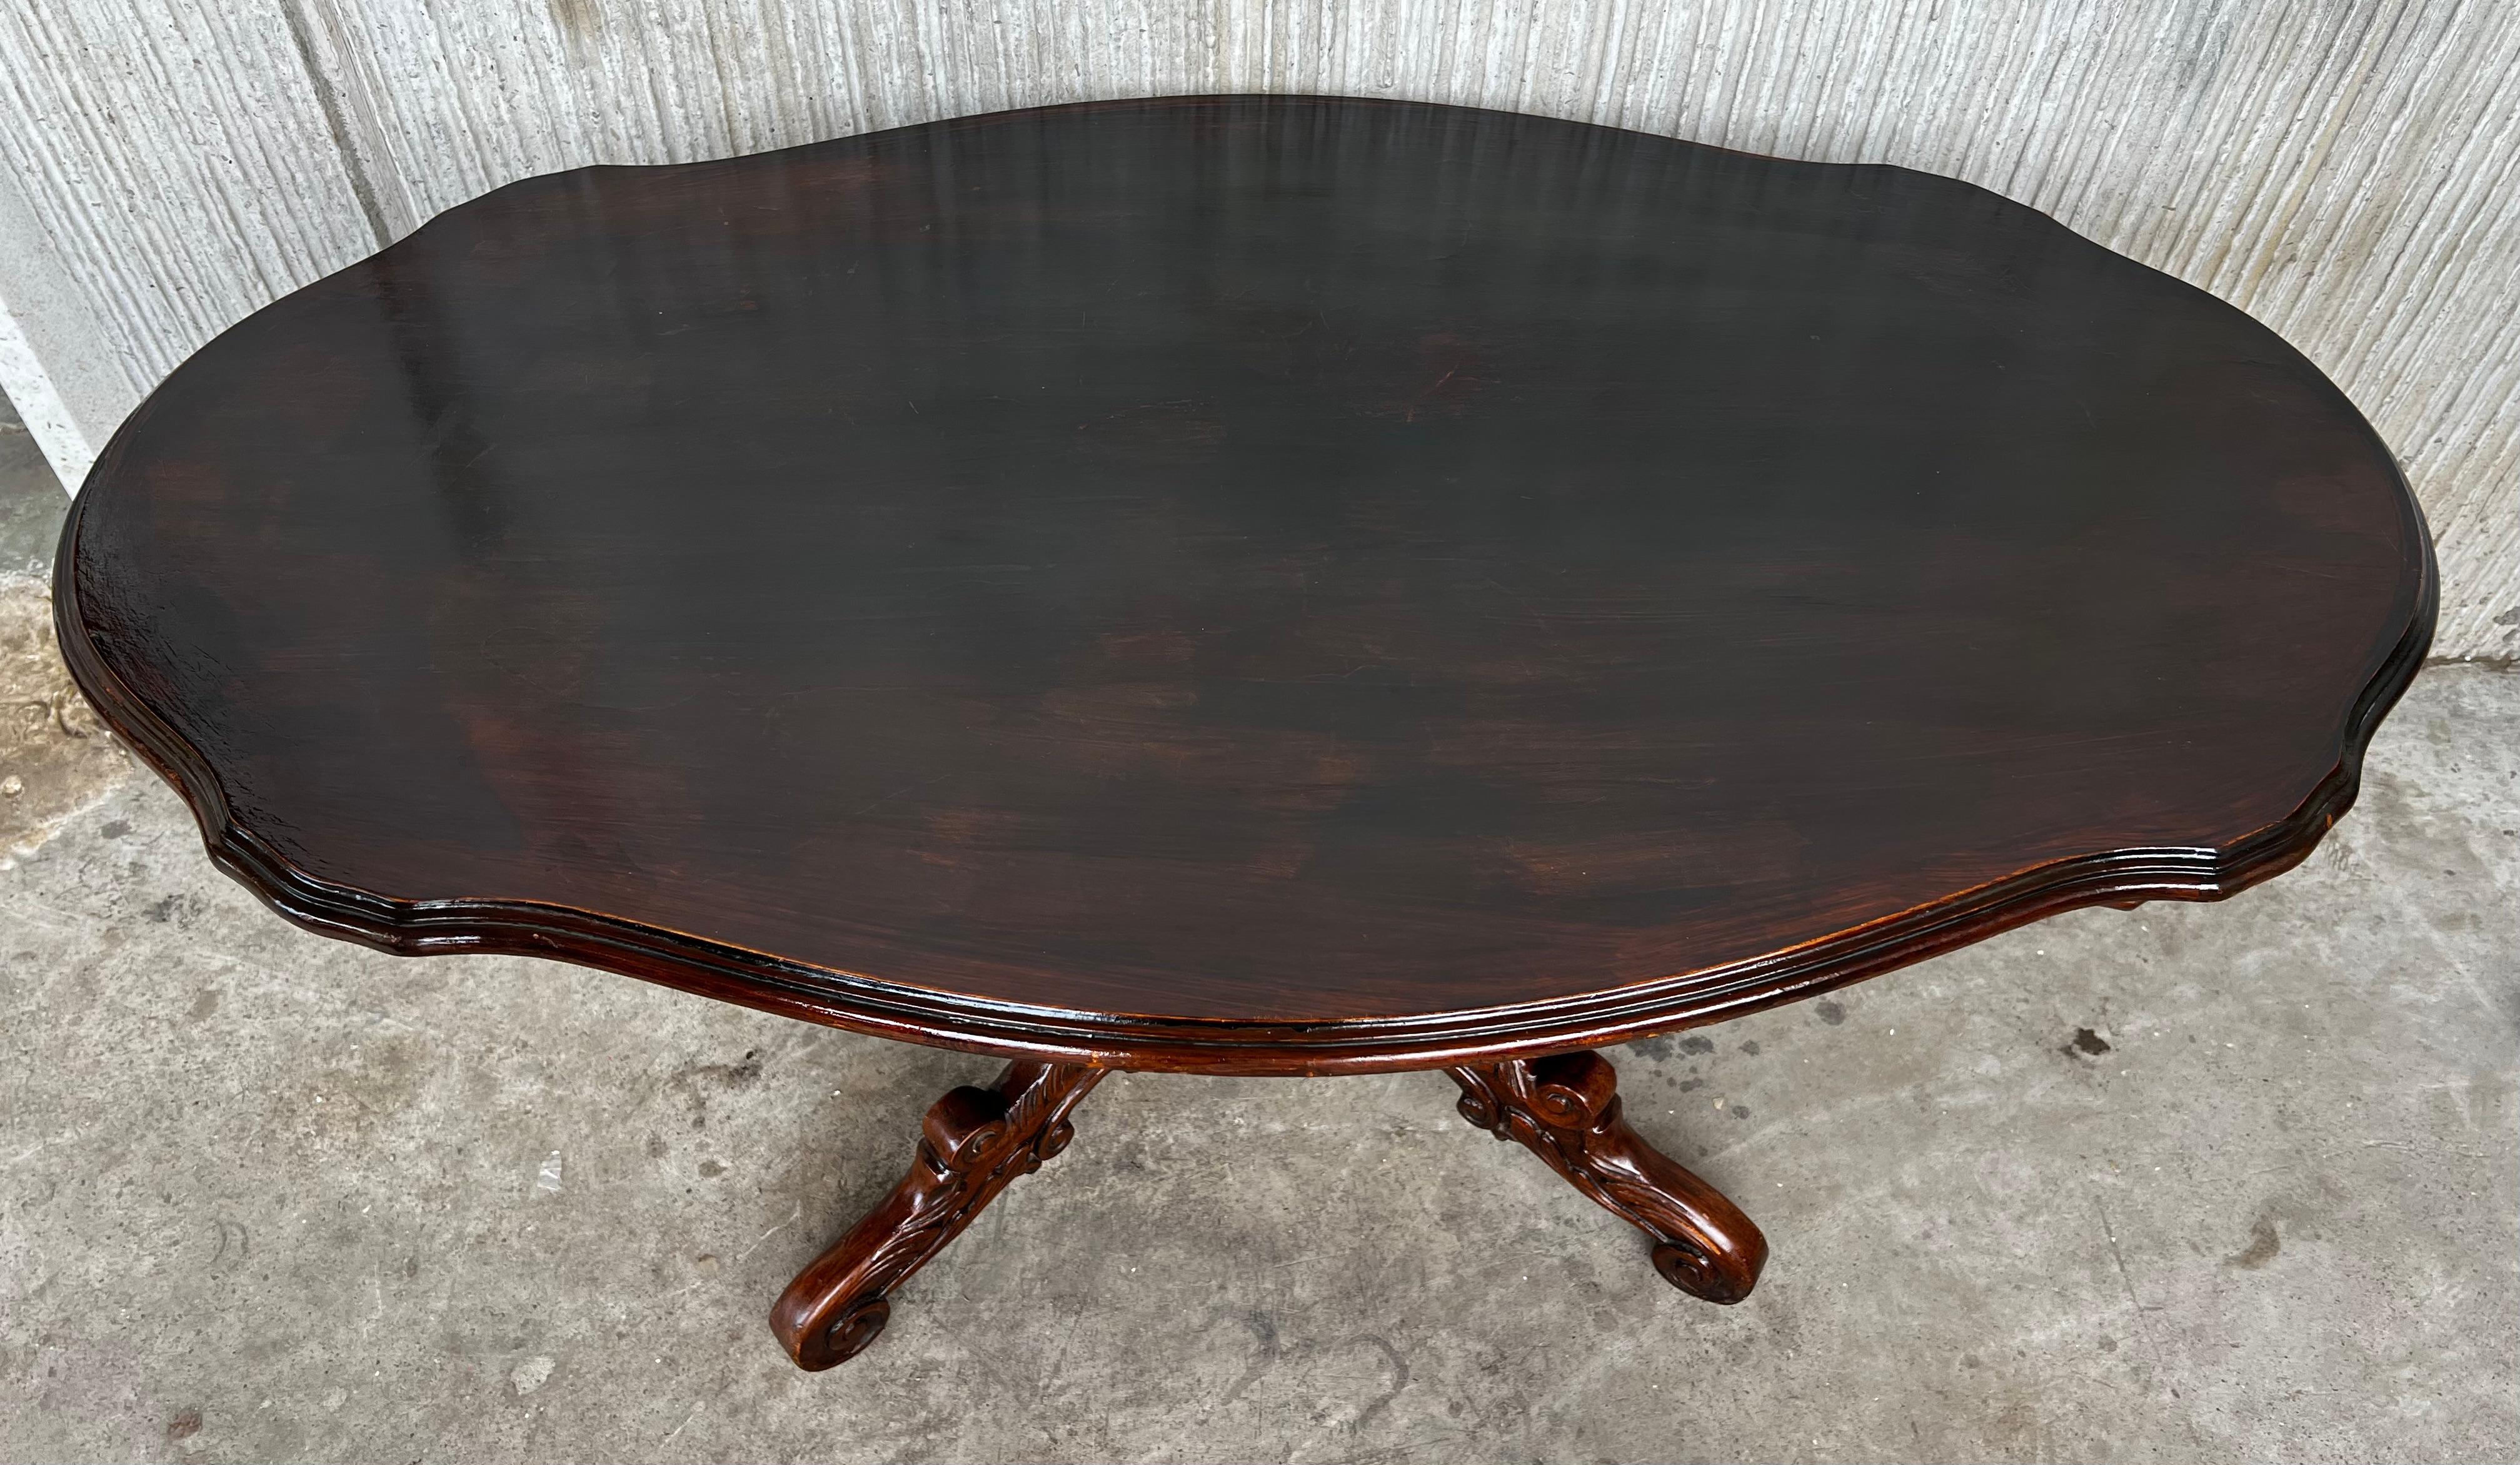 20th Century Spanish Mariano Garcia Carved Pedestal Coffee Table In Good Condition For Sale In Miami, FL